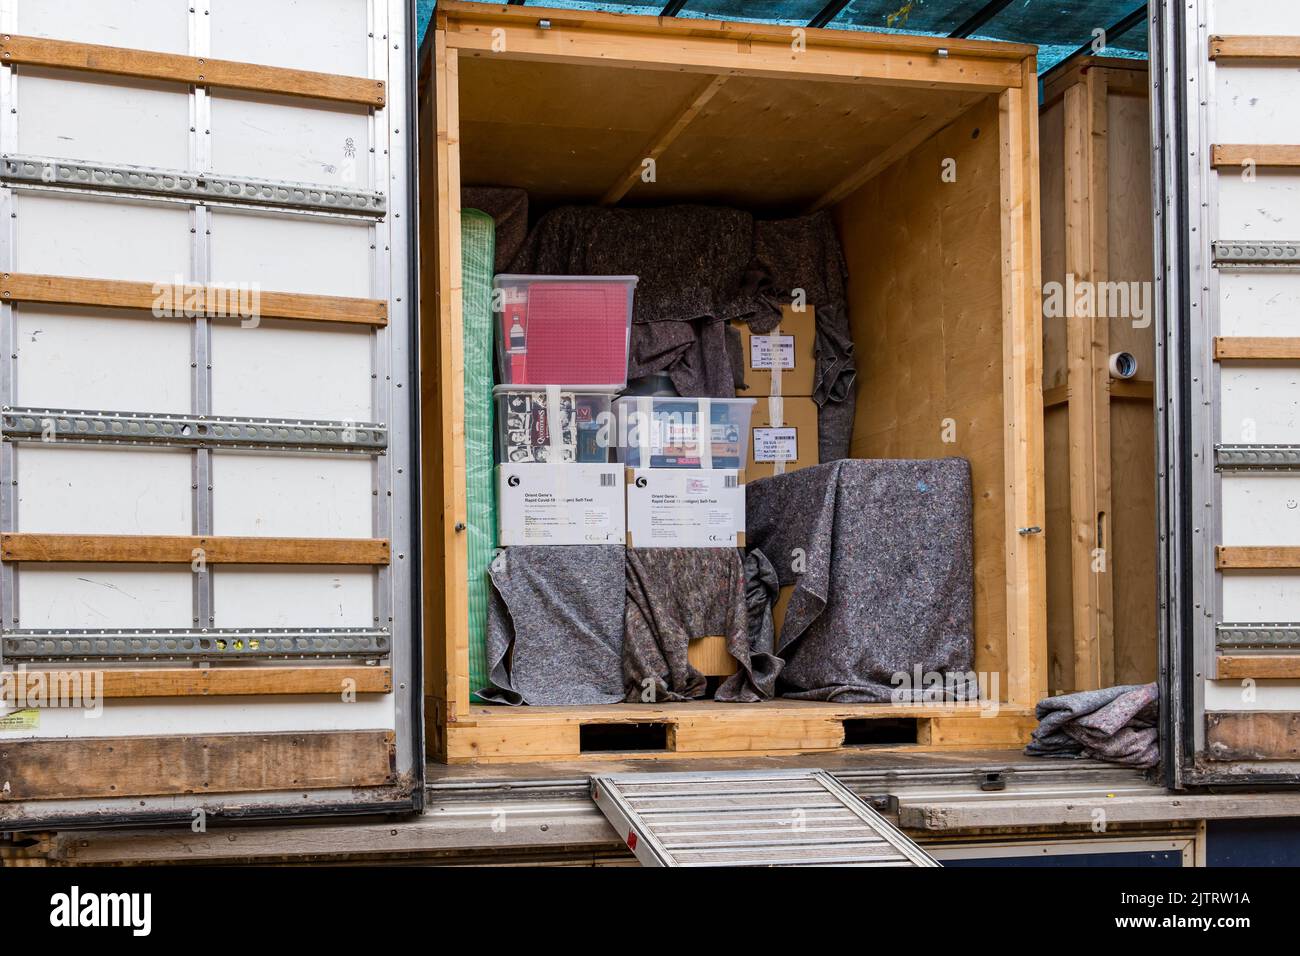 Household items, furniture and boxes packed into lorry storage container for moving house, UK Stock Photo